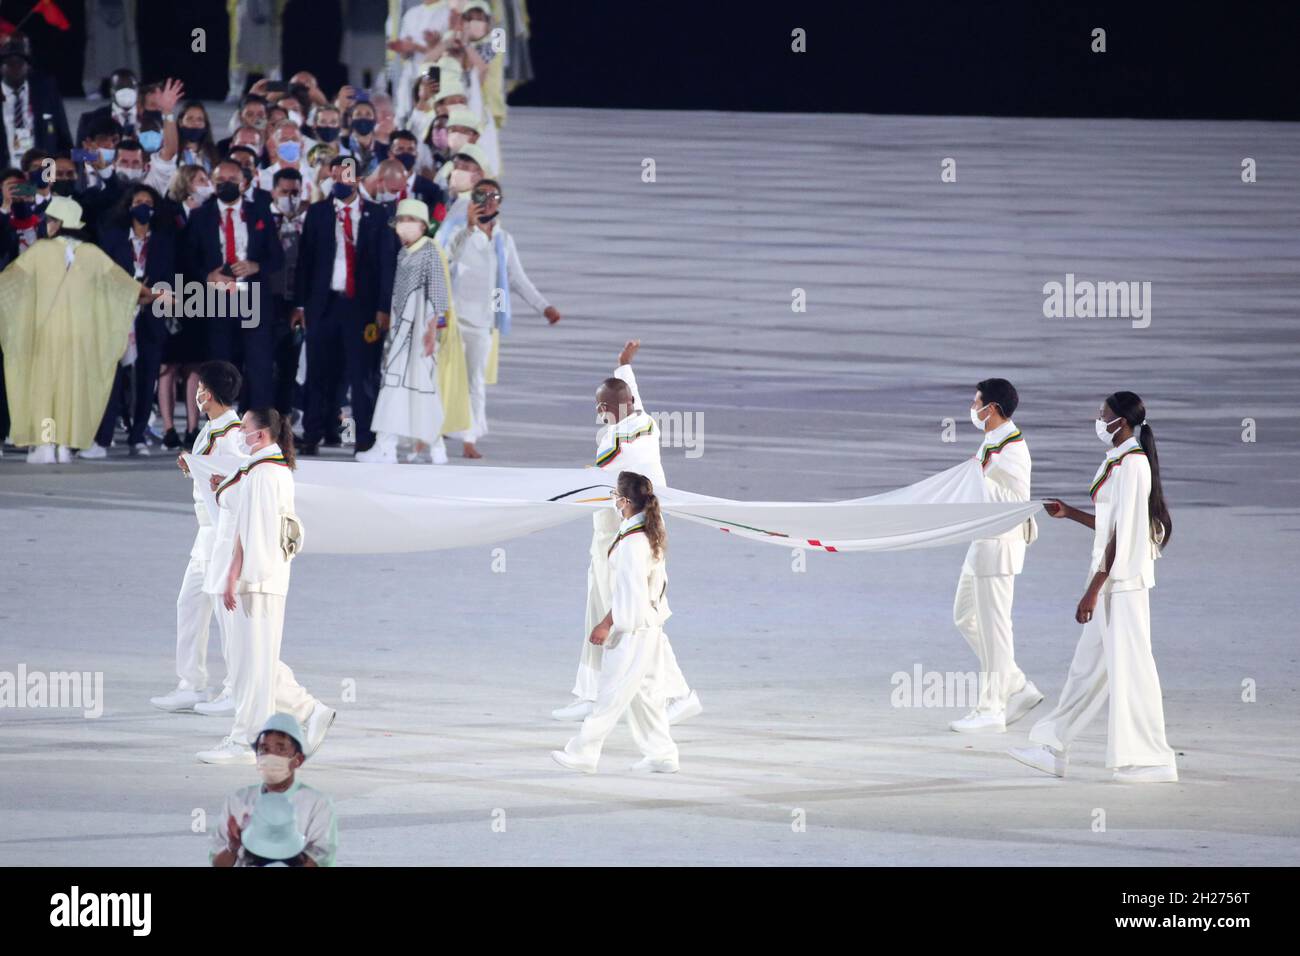 JULY 23rd, 2021 - TOKYO, JAPAN: the Olympic Flag enters the stadium carried by Kento Momota for Asia, Elena Galiabovitch for Oceania, Paula Pareto for Stock Photo